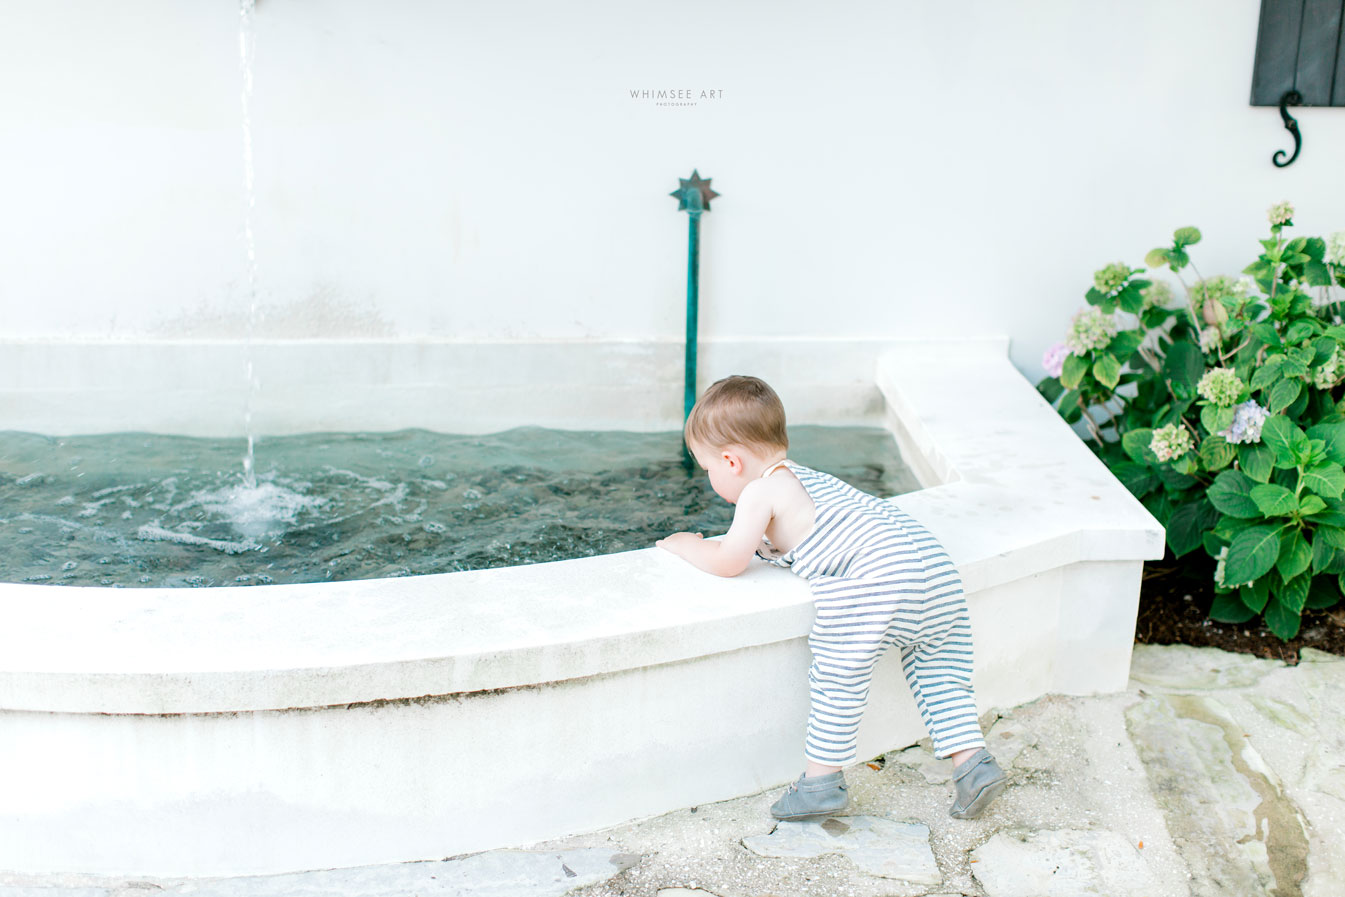 Travel Photography | Alys Beach, FL Family Photo Session | Whimsee Art Photography